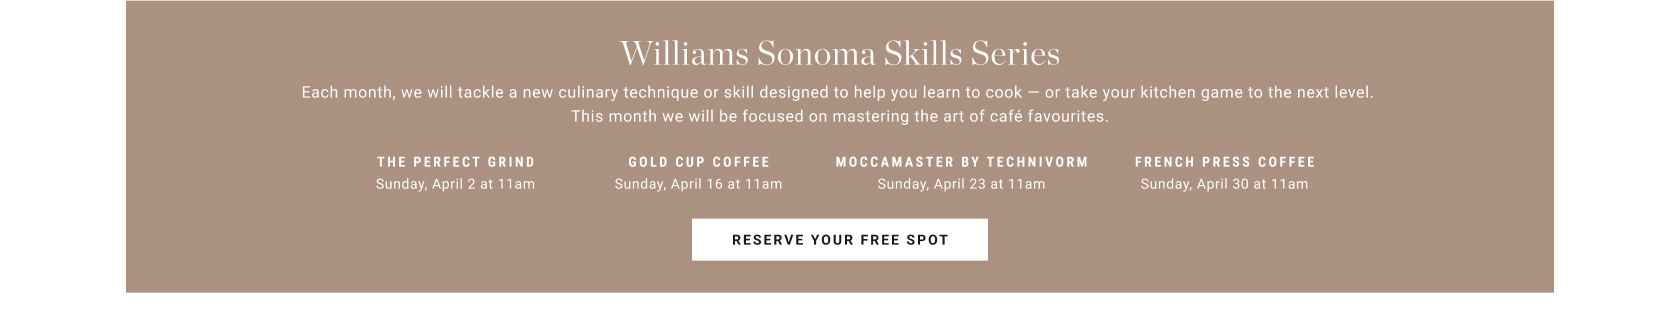 Reserve Your Free Spot for Our Coffee Skills Series